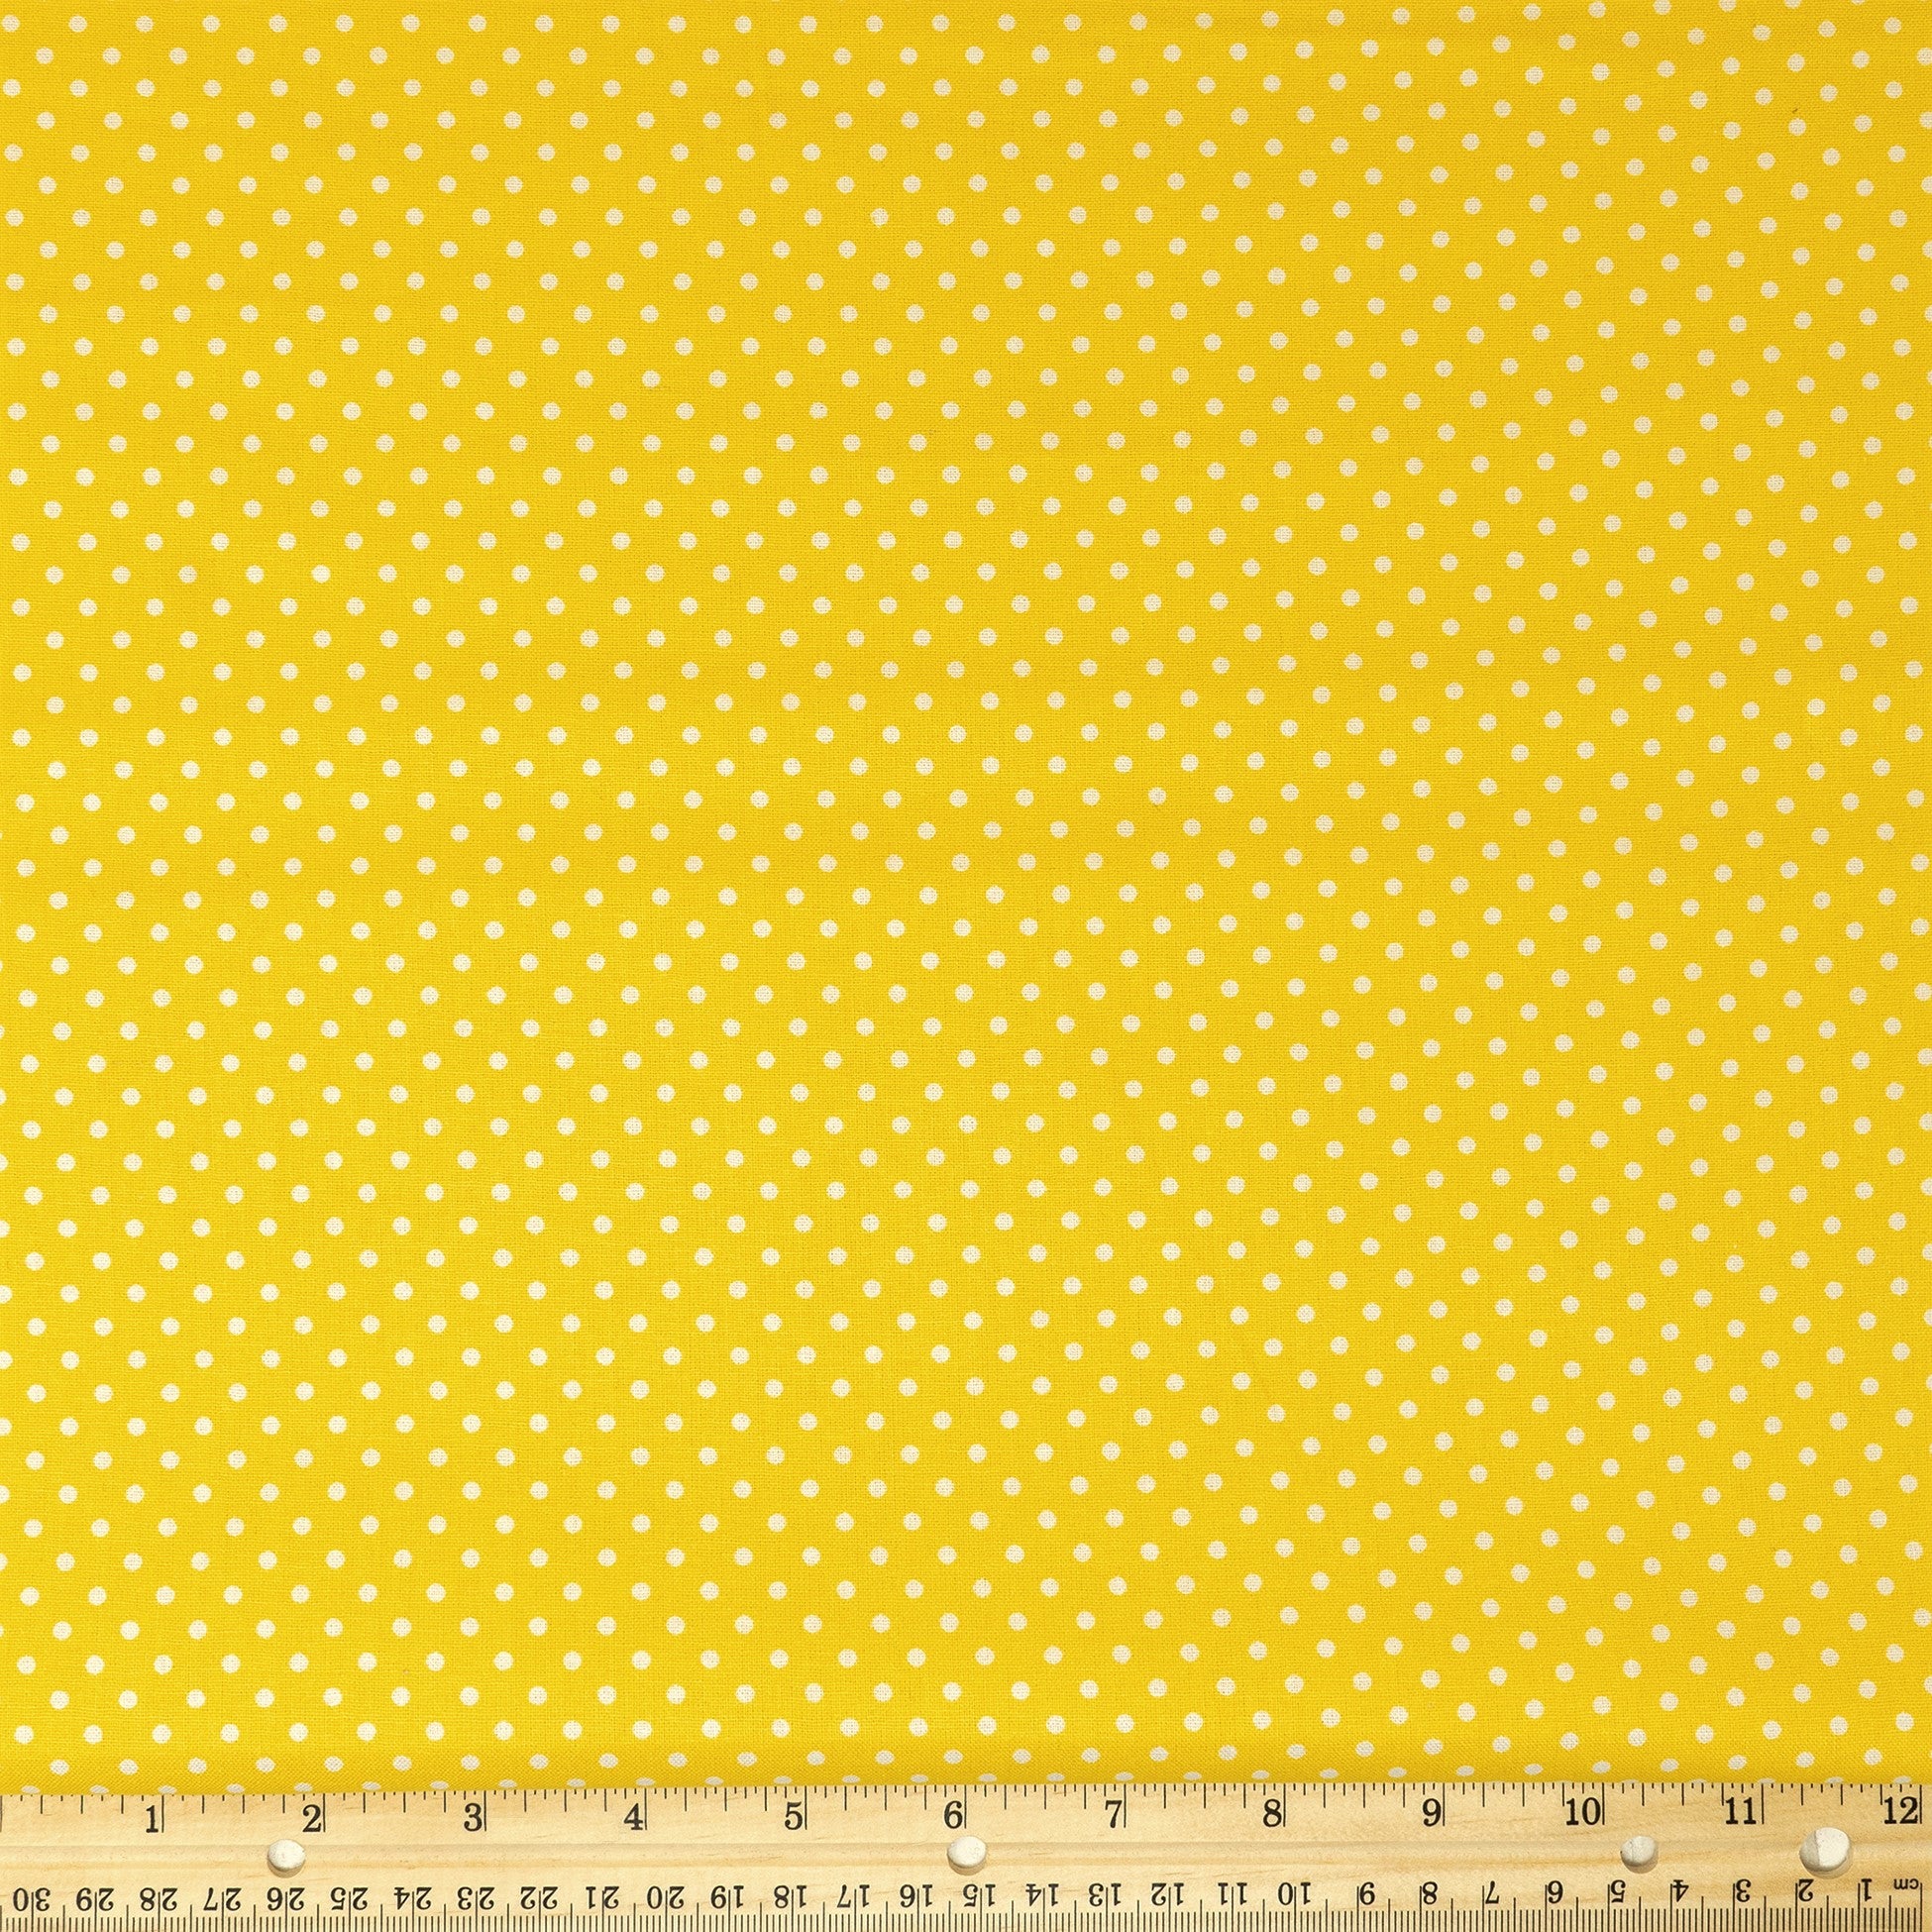 Waverly Inspirations Cotton 44" Med Dot Sunshine Color Sewing Fabric by the Yard